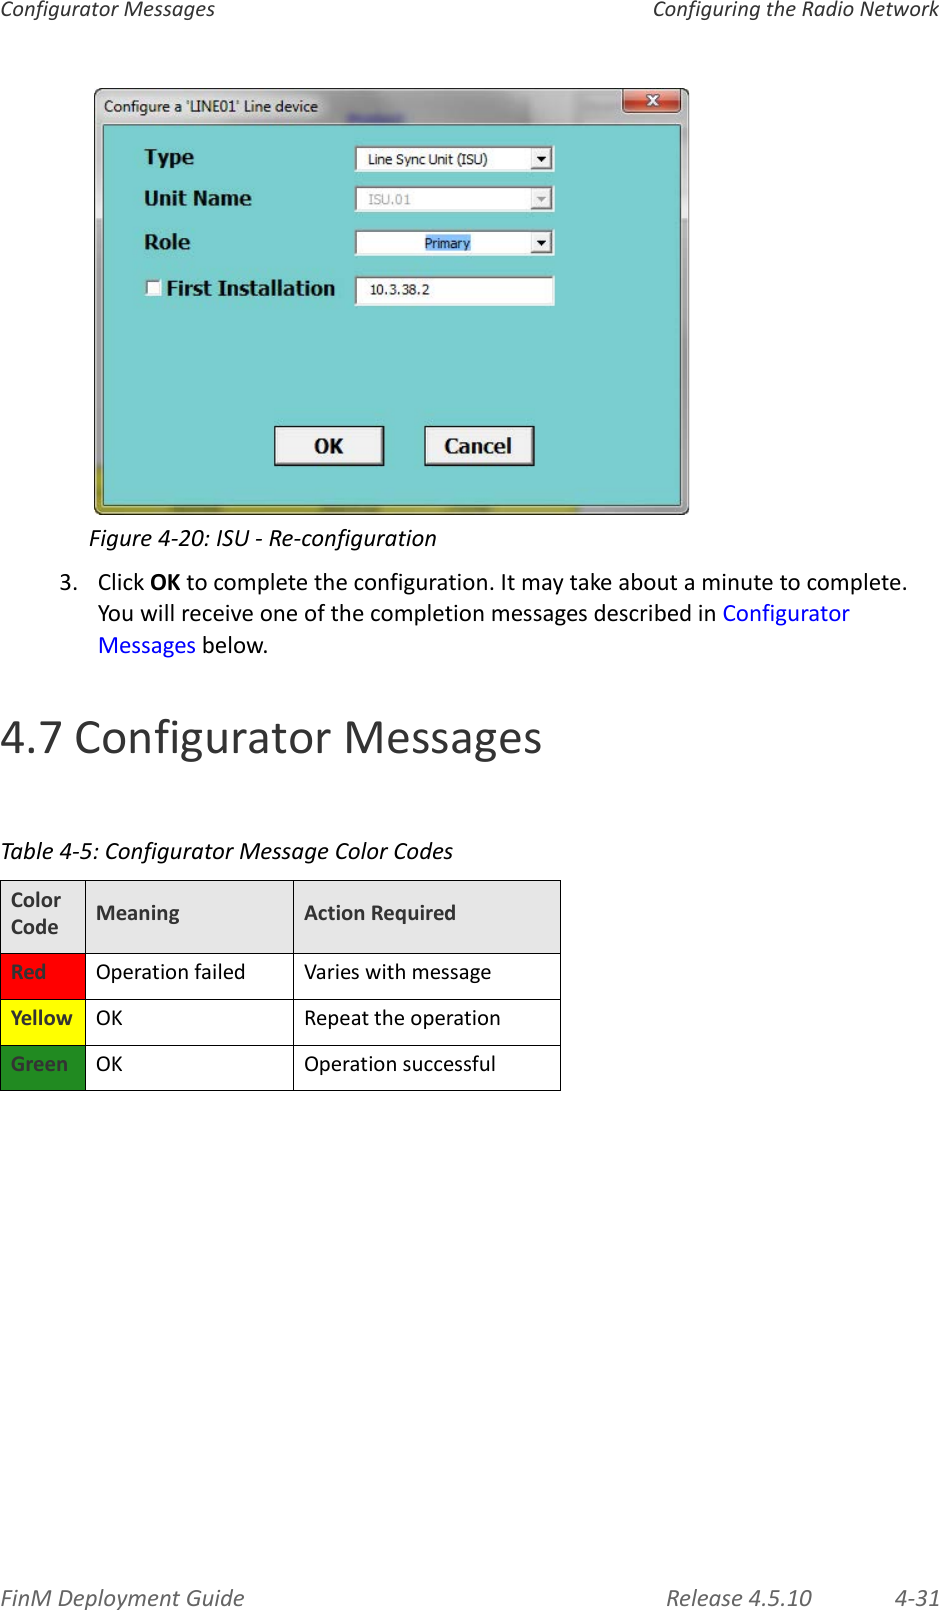 FinMDeploymentGuide Release4.5.10 4‐31ConfiguratorMessages ConfiguringtheRadioNetworkFigure4‐20:ISU‐Re‐configuration3. ClickOKtocompletetheconfiguration.Itmaytakeaboutaminutetocomplete.YouwillreceiveoneofthecompletionmessagesdescribedinConfiguratorMessagesbelow.4.7ConfiguratorMessagesTable4‐5:ConfiguratorMessageColorCodesColorCode Meaning ActionRequiredRed Operationfailed VarieswithmessageYellow OK RepeattheoperationGreen OK Operationsuccessful